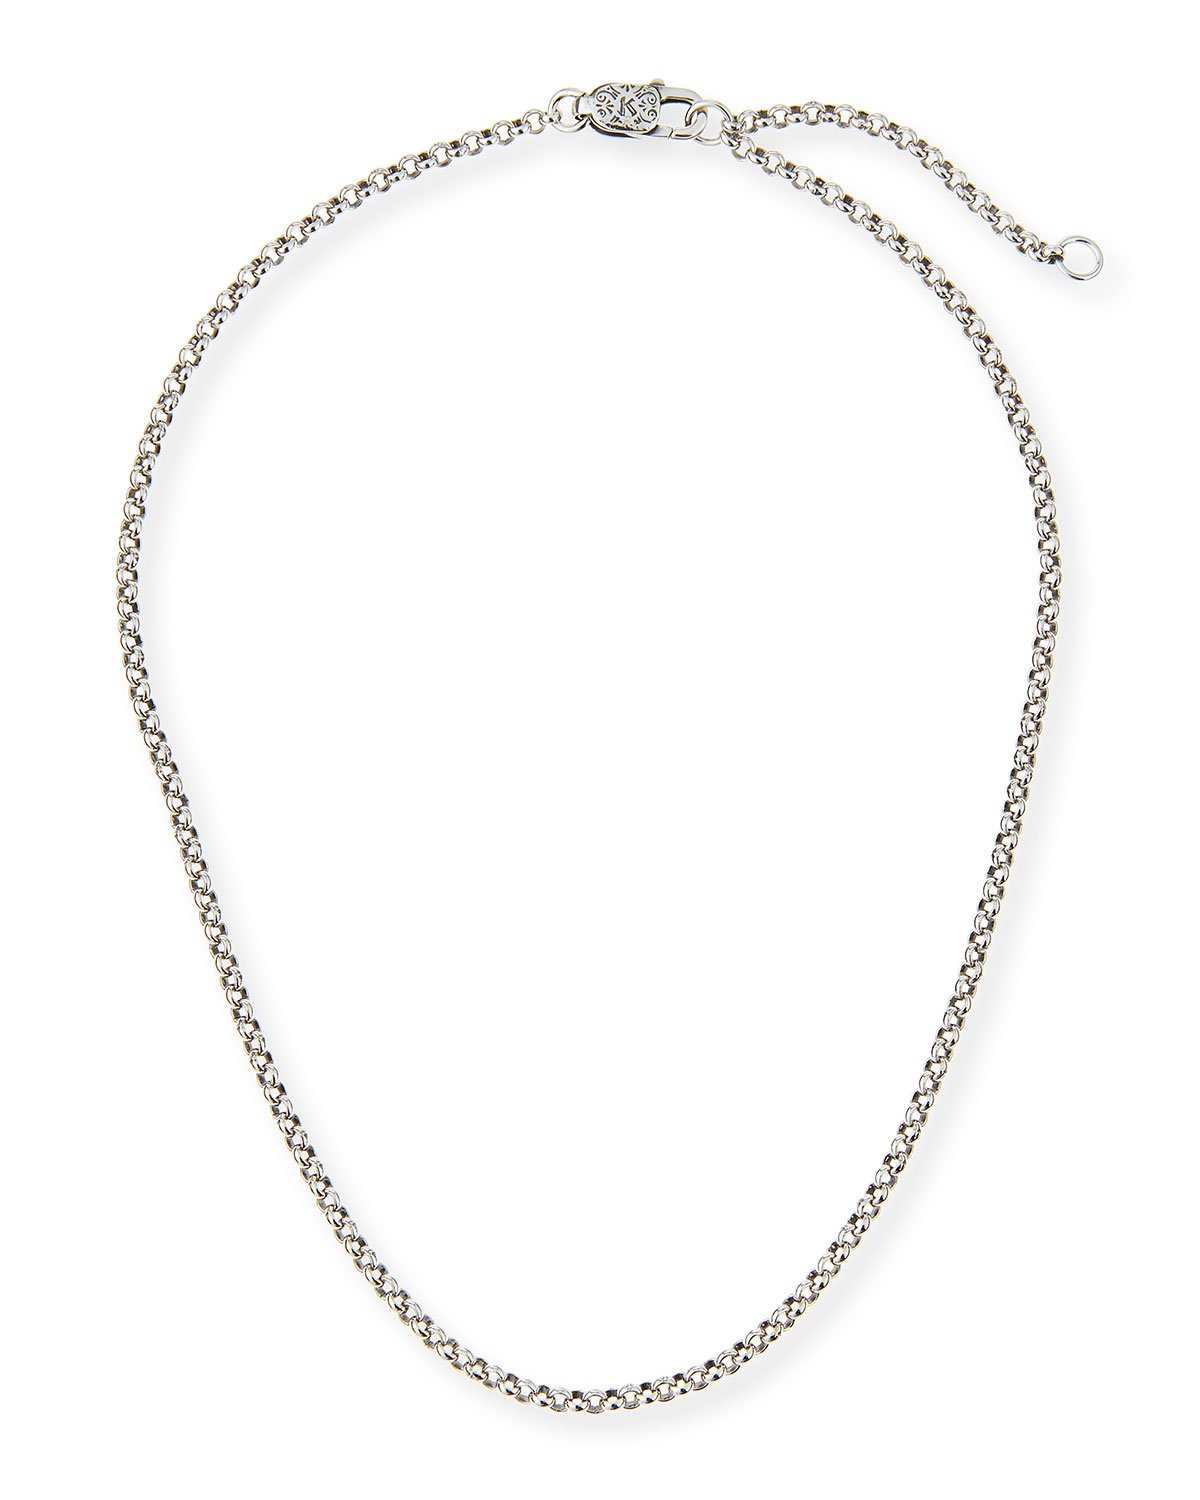 Lyst - Konstantino Sterling Silver Adjustable Chain Necklace in Metallic